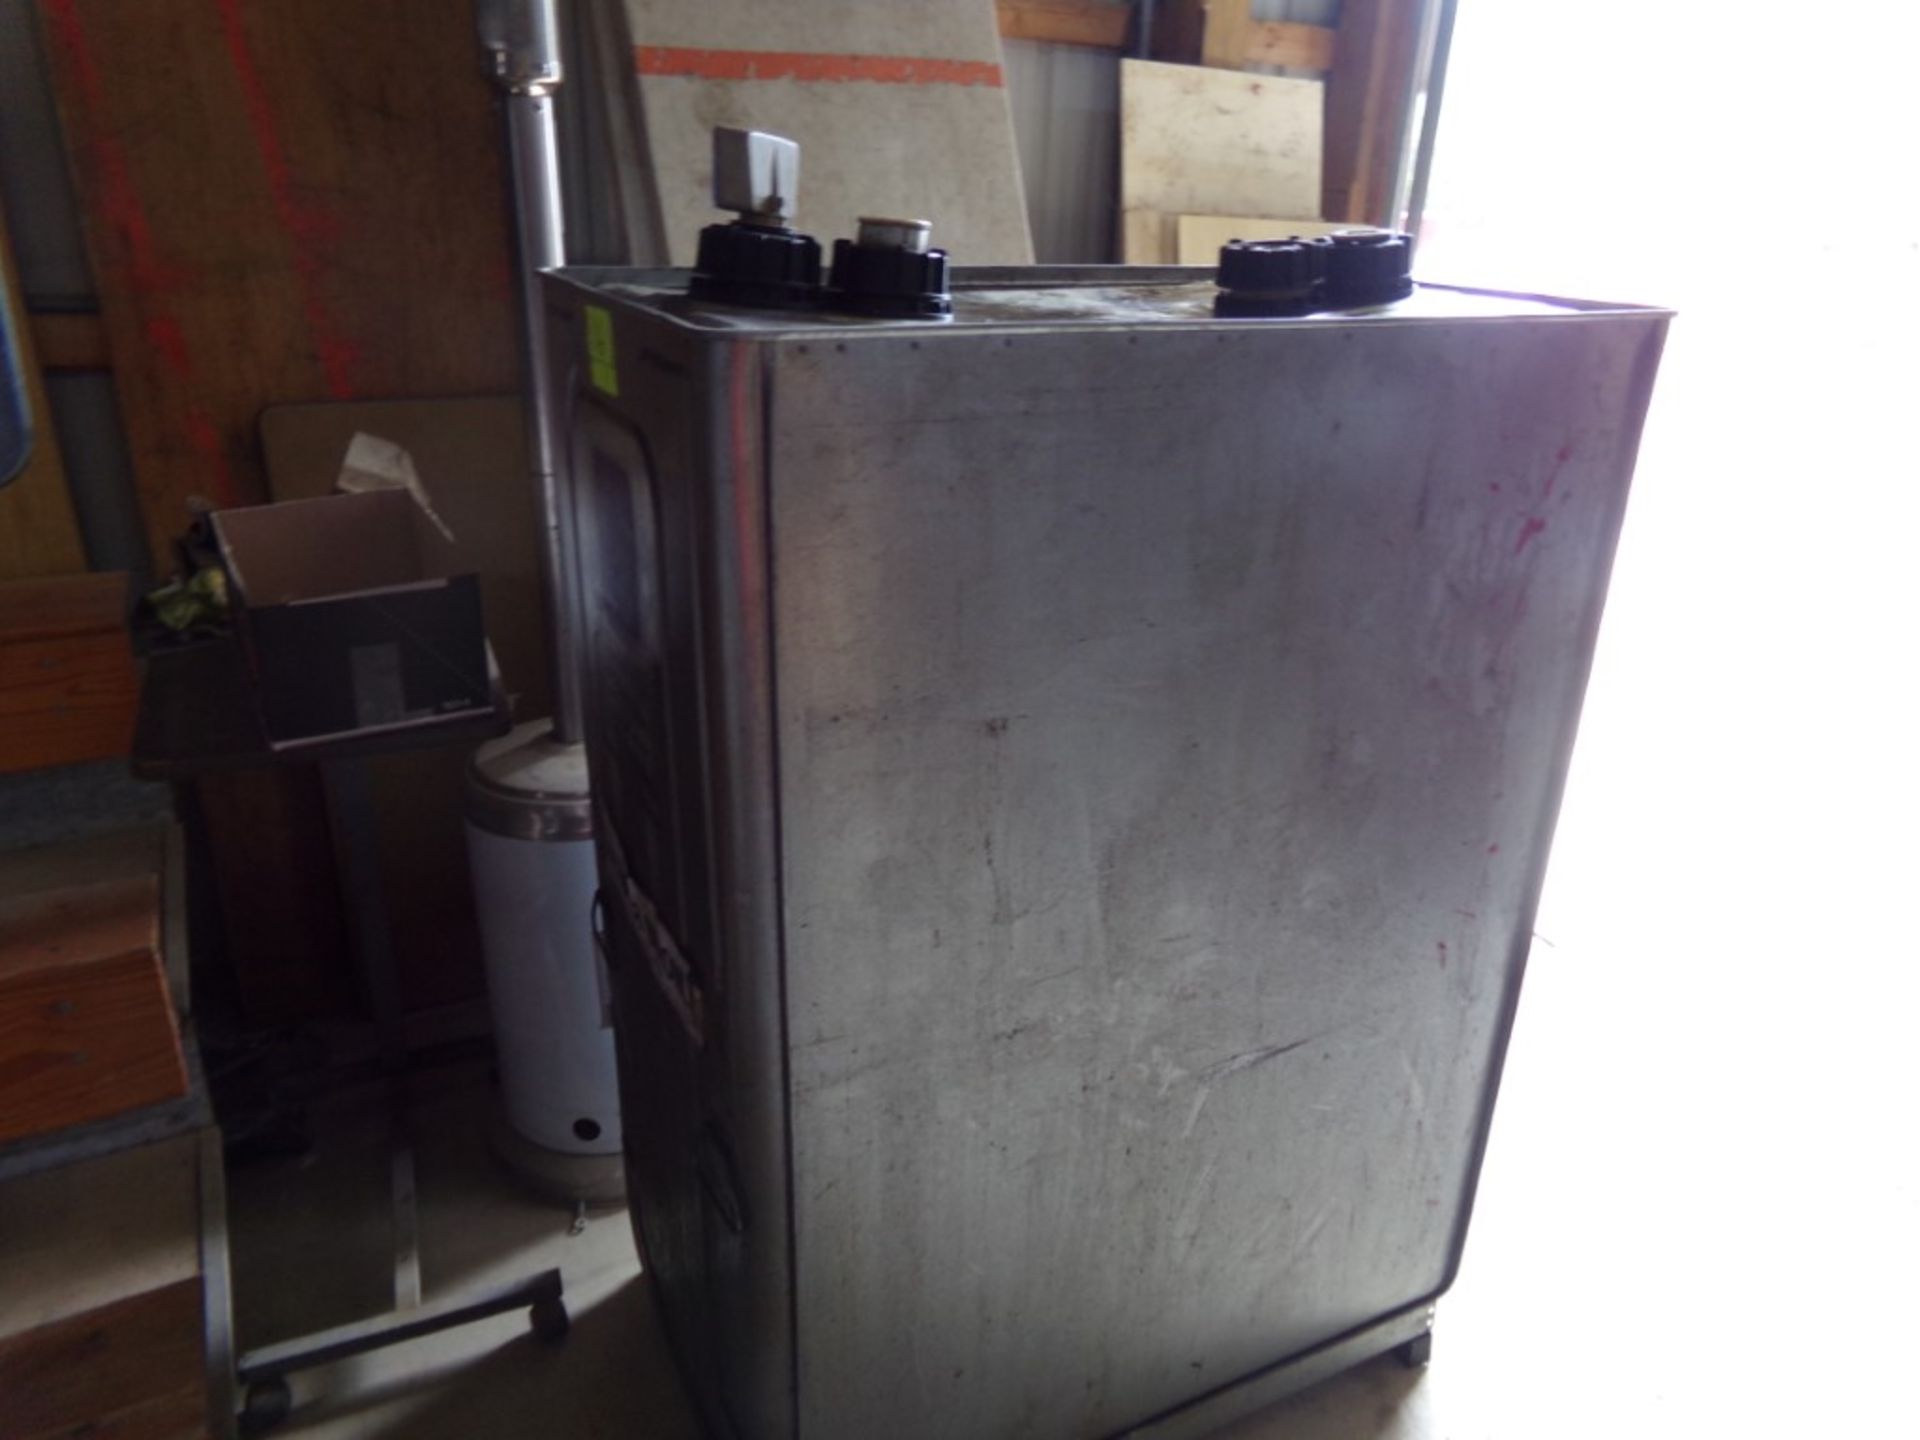 Roth 275 Gal. Above Ground Double Wall Non-Metallic Tank with Secondary Containment for Fuel Oil. - Image 2 of 2